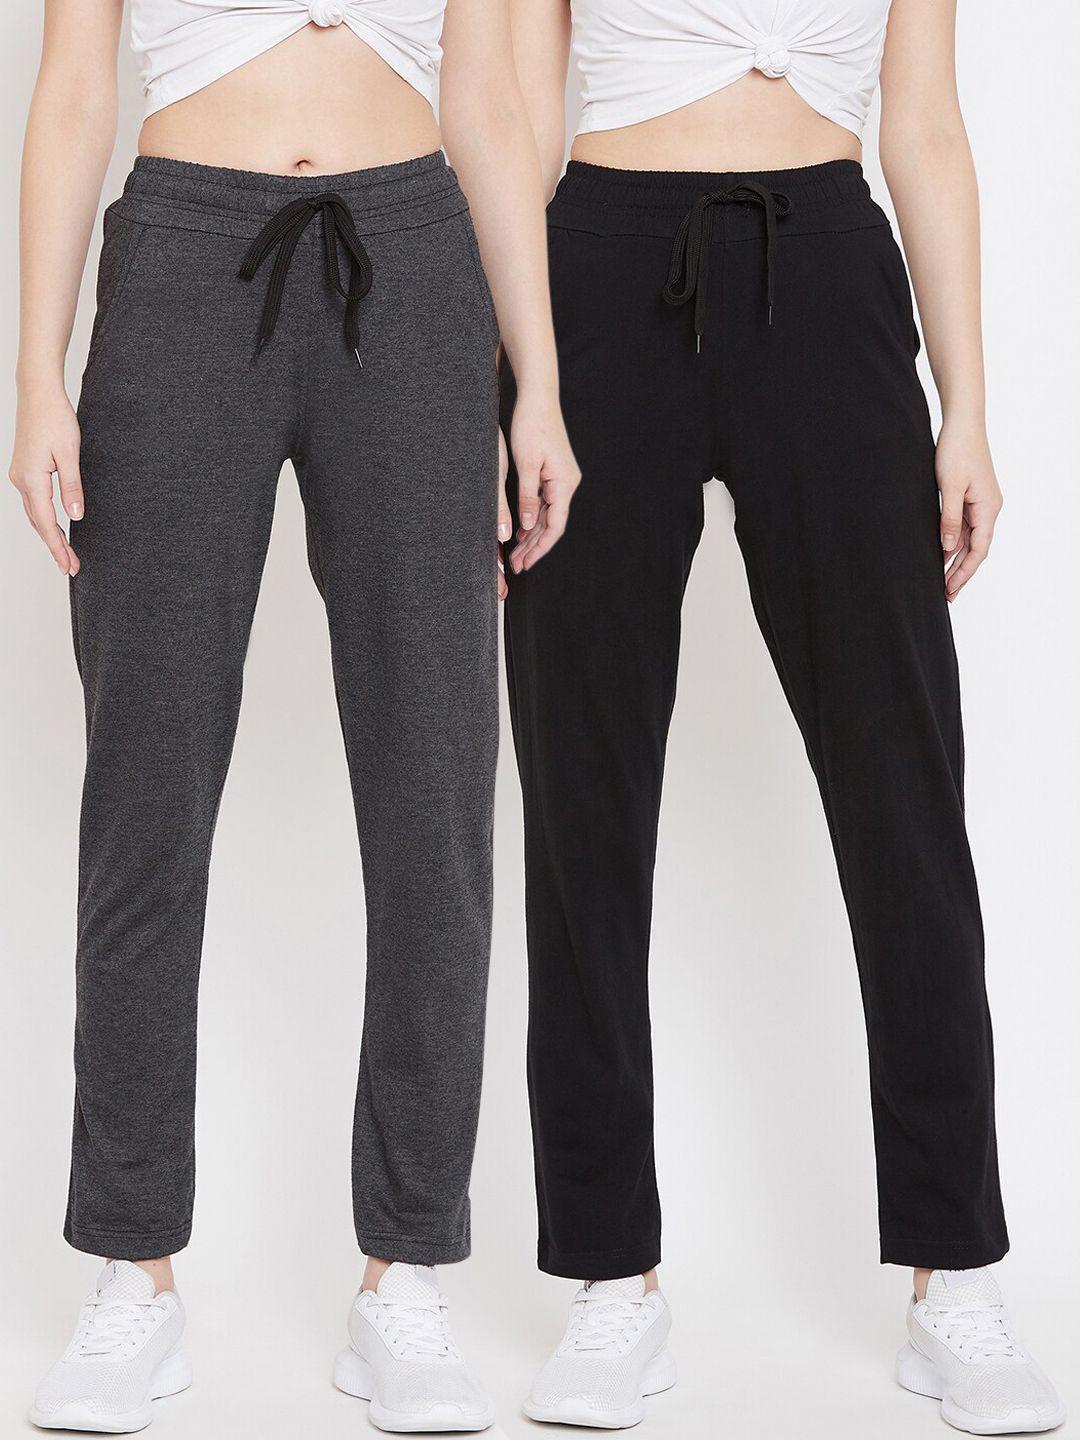 stylestone women pack of 2 solid track pants